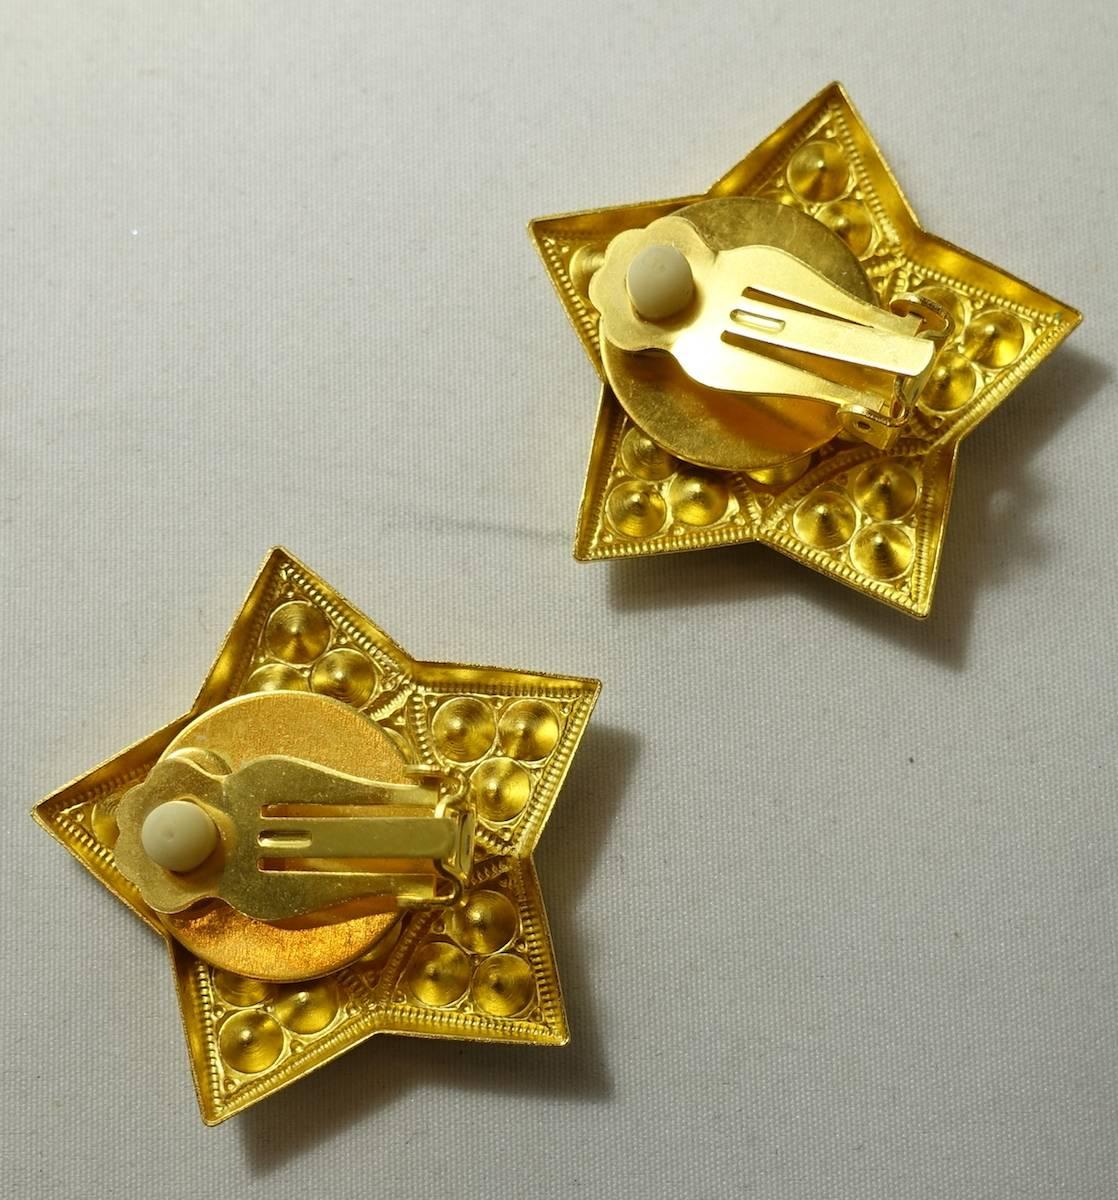 This vintage signed Kirks Folly earrings feature a star design with faceted Aurora Borealis in a heavily etched gold tone setting.  These clip earrings measure 1-1/2” across and are signed “Kirks Folly”.  They are in excellent condition